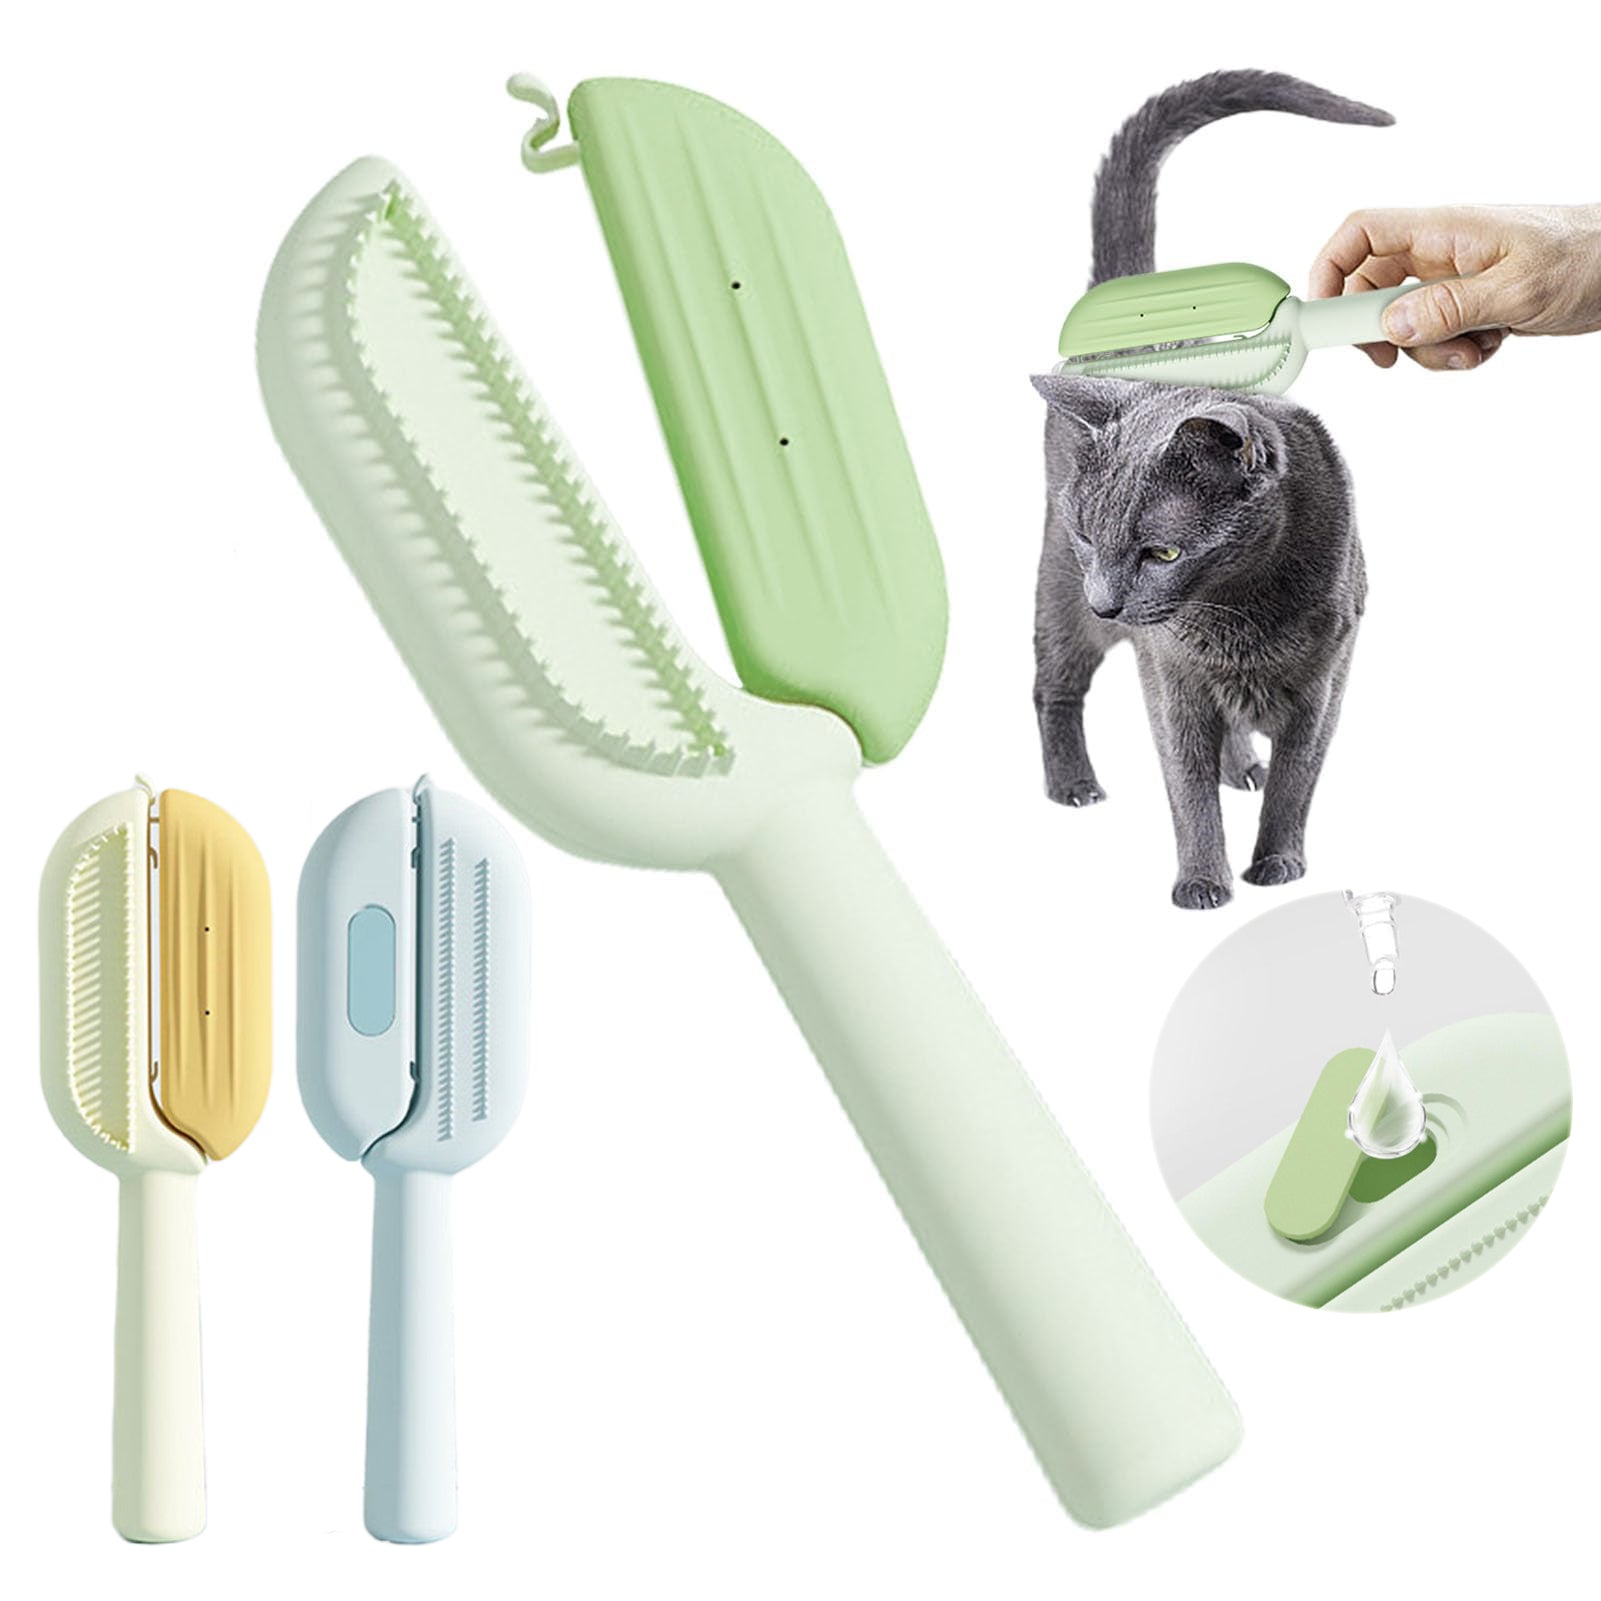 3-In-1 Self-Cleaning Massage Combs - Floating Hair Removal Brush for Pets Grooming